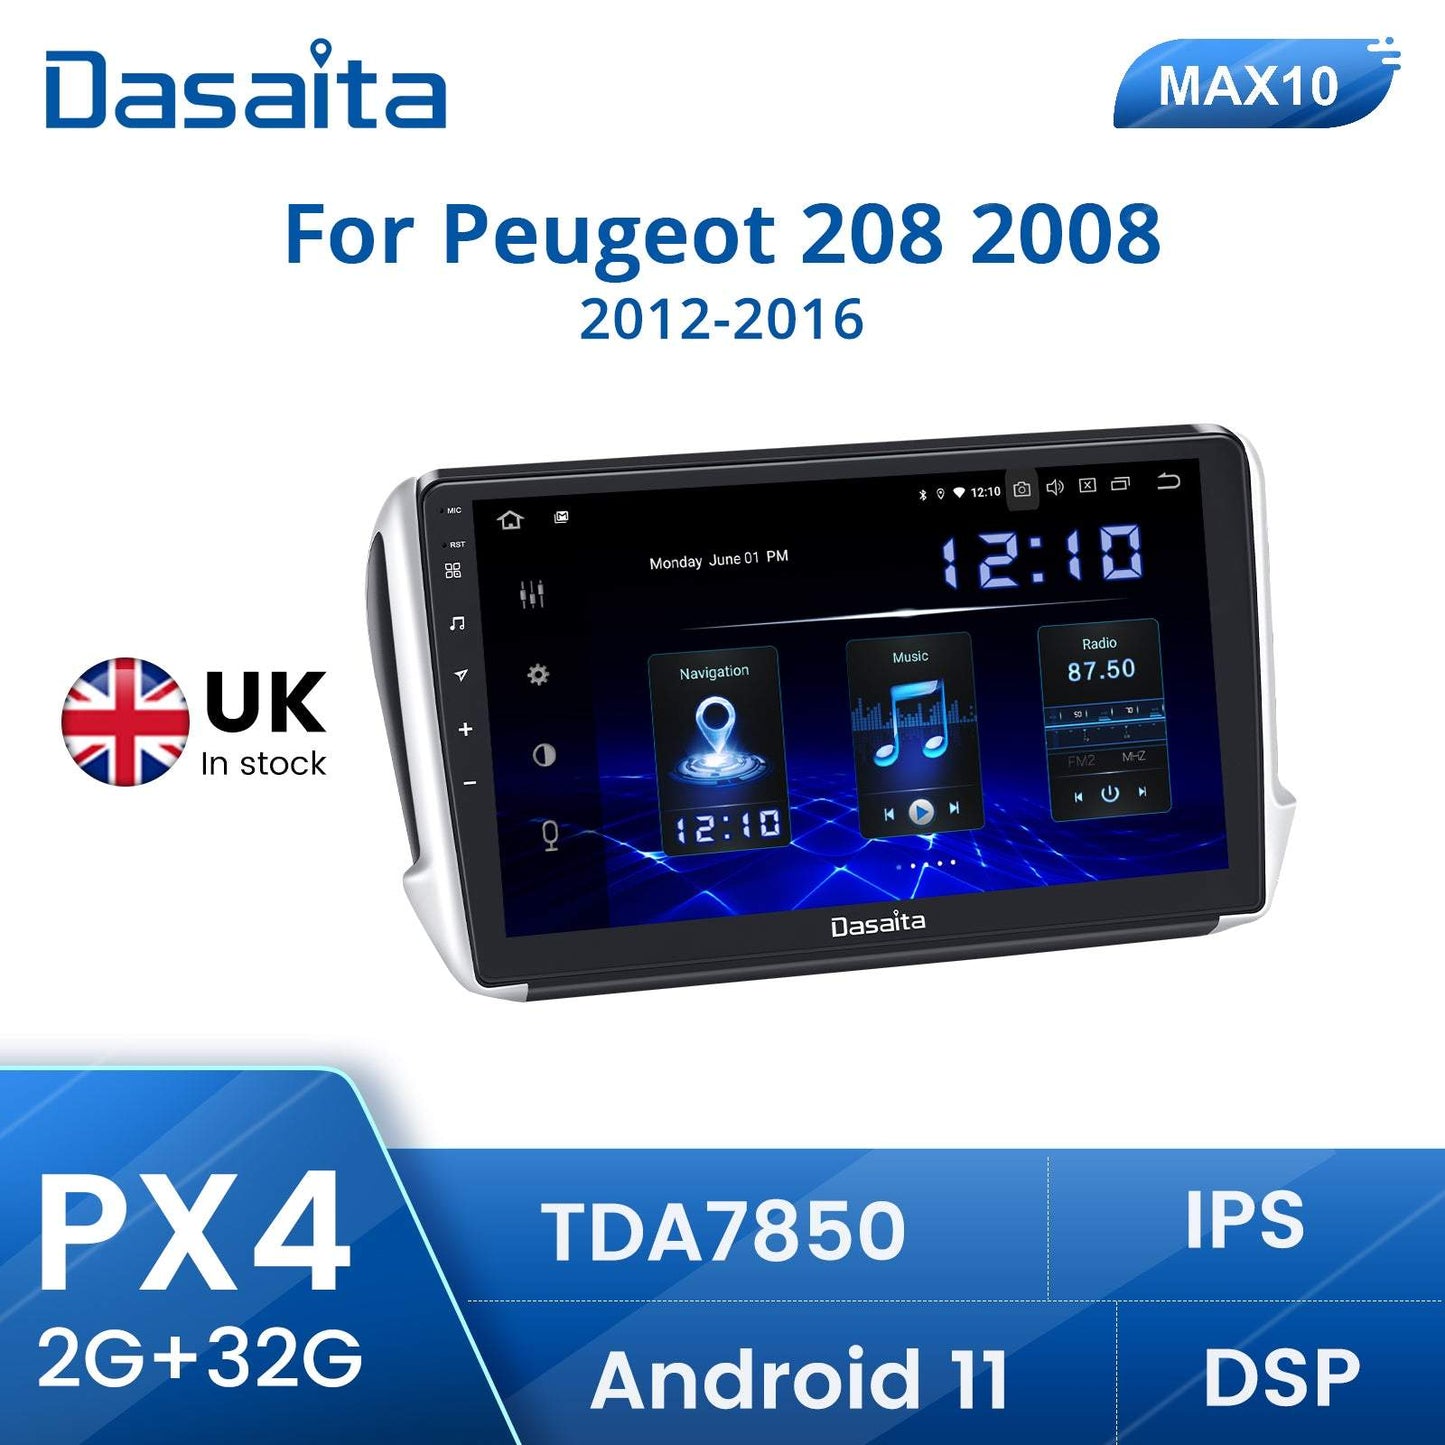 Dasaita (Outlets) W11 Peugeot 208 2008 2012 2013 2014 2015 2016 Car Stereo 10.2 Inch PX4 2G+32G Android11 1024*600 DSP AHD Radio